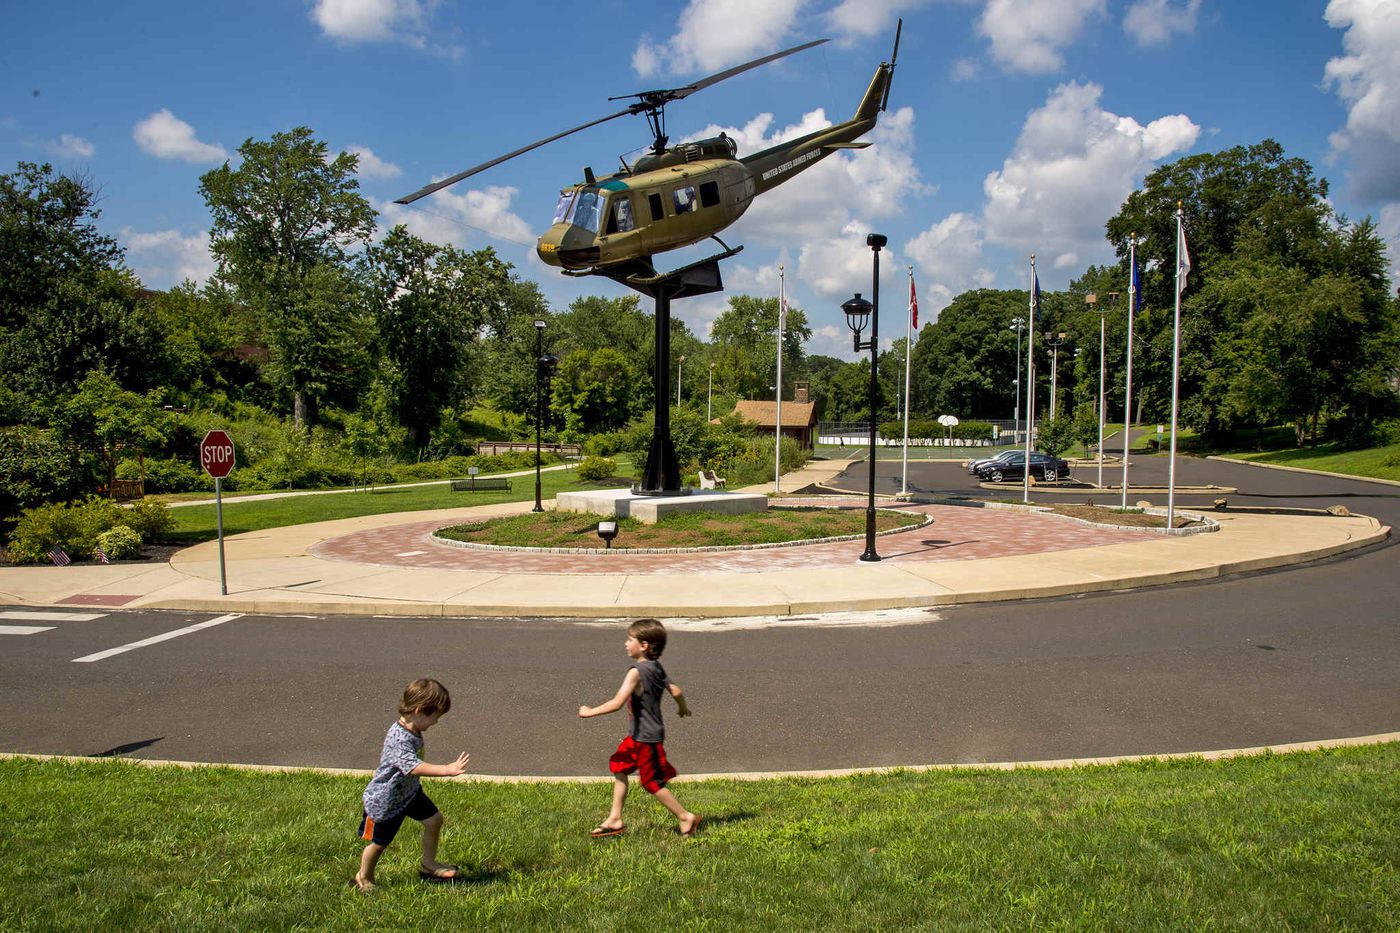 Noah (left, 3) and Nate Kolsky, 5, pretend to be airplanes, playing near the memorial.